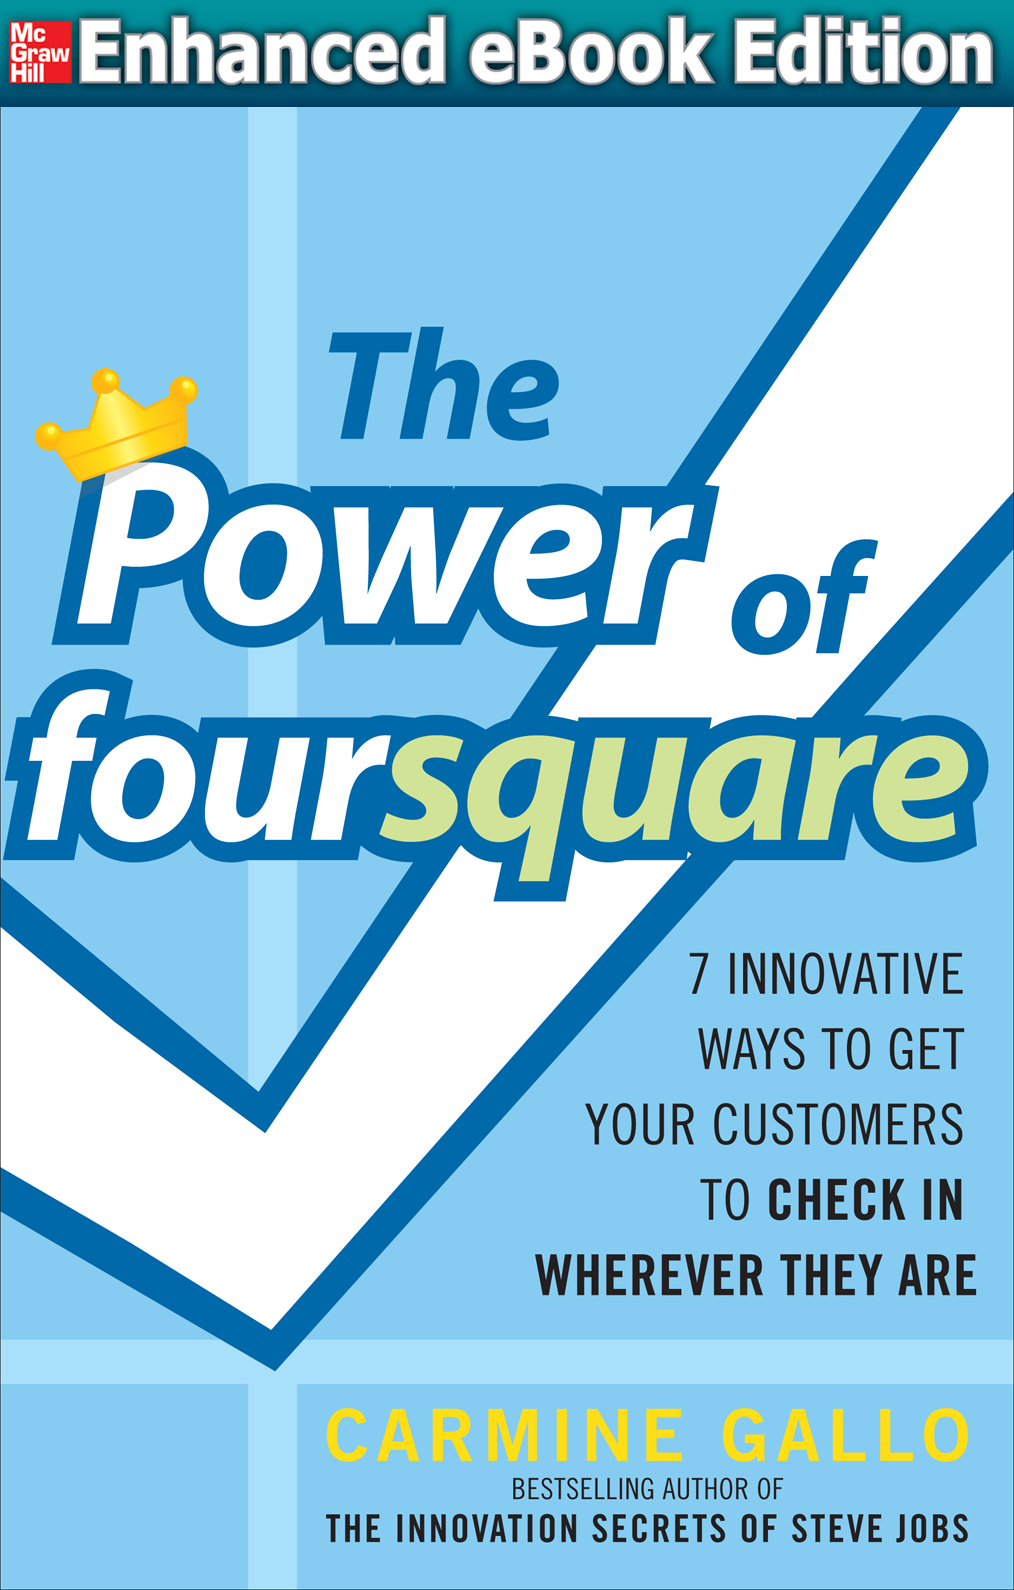 The Power of foursquare